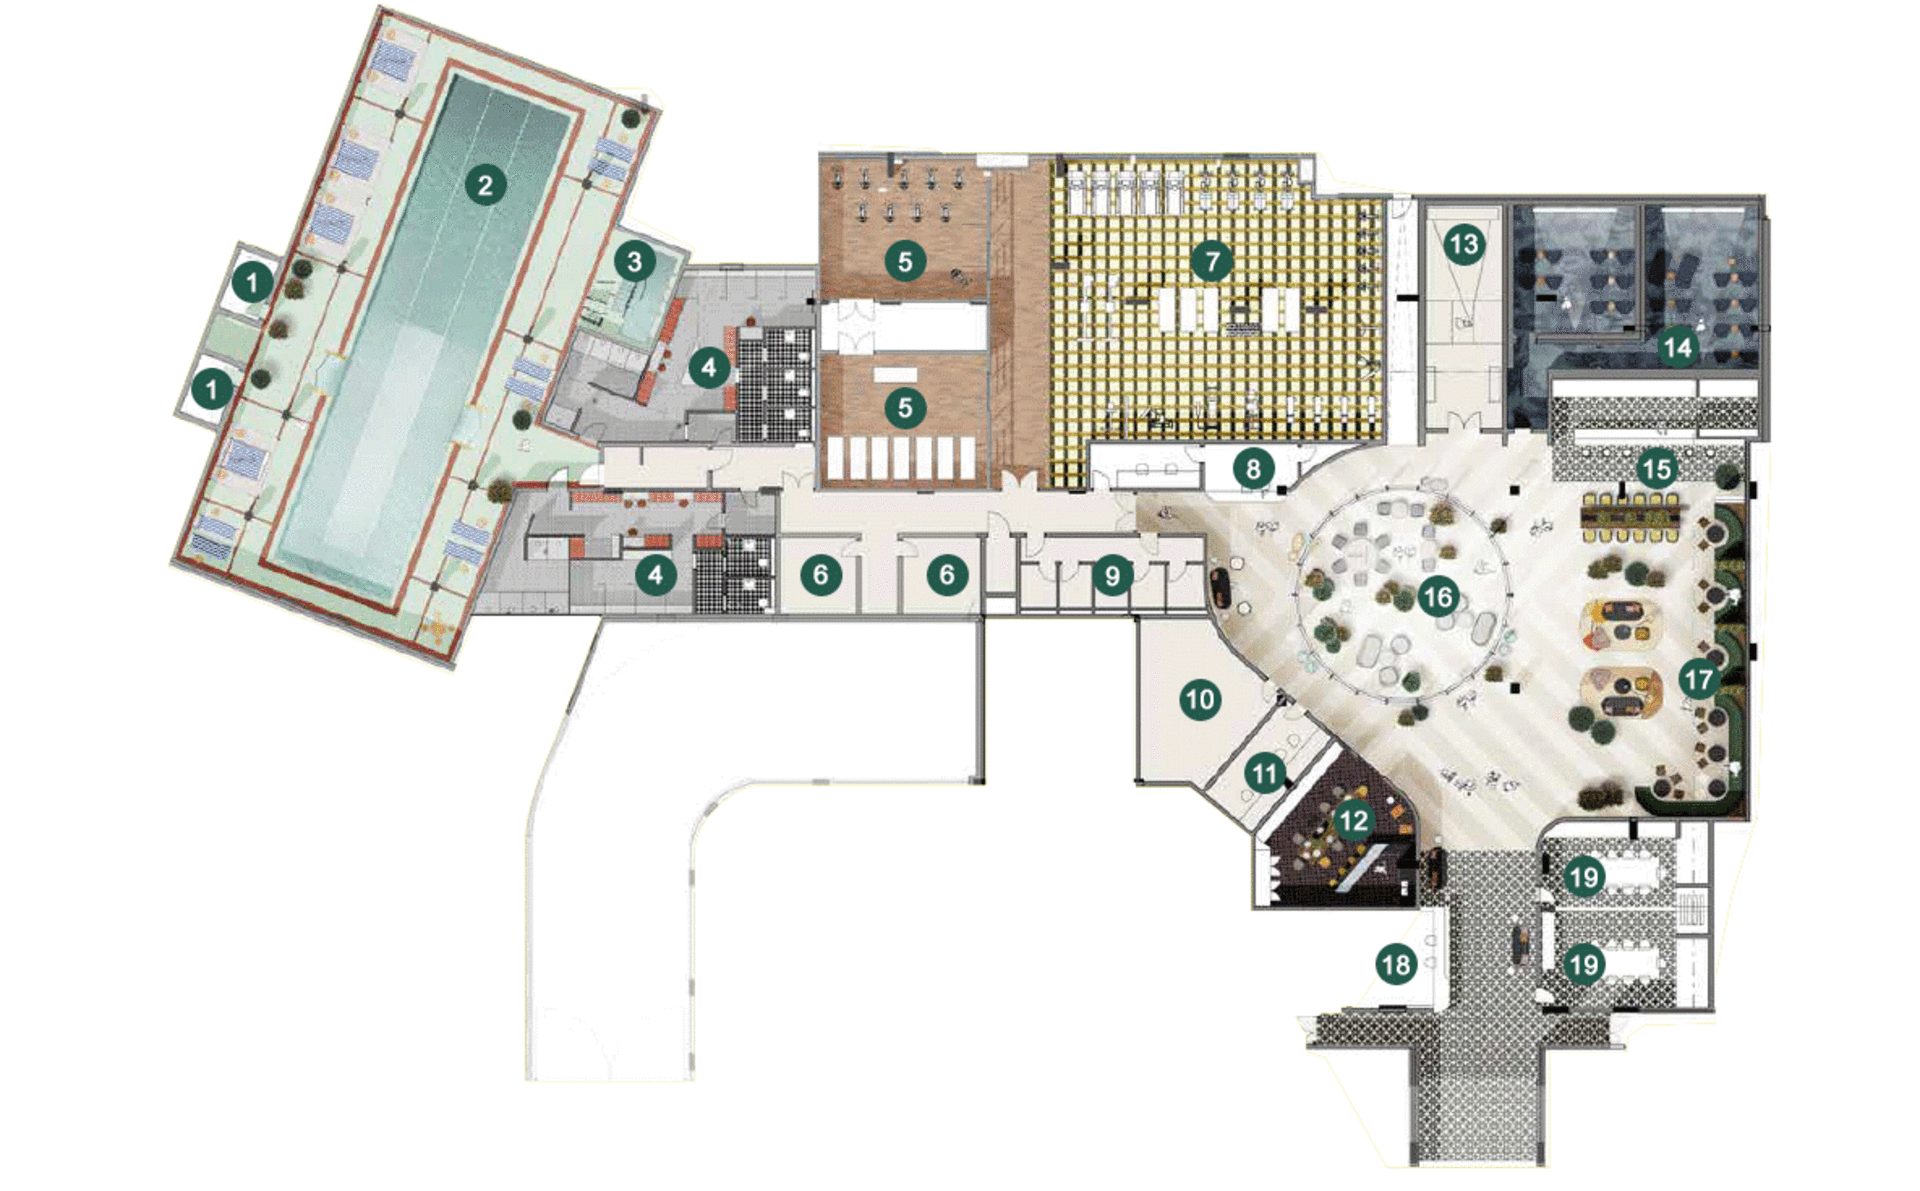 St William, King's Road Park, Resident's Facilities Site Plan